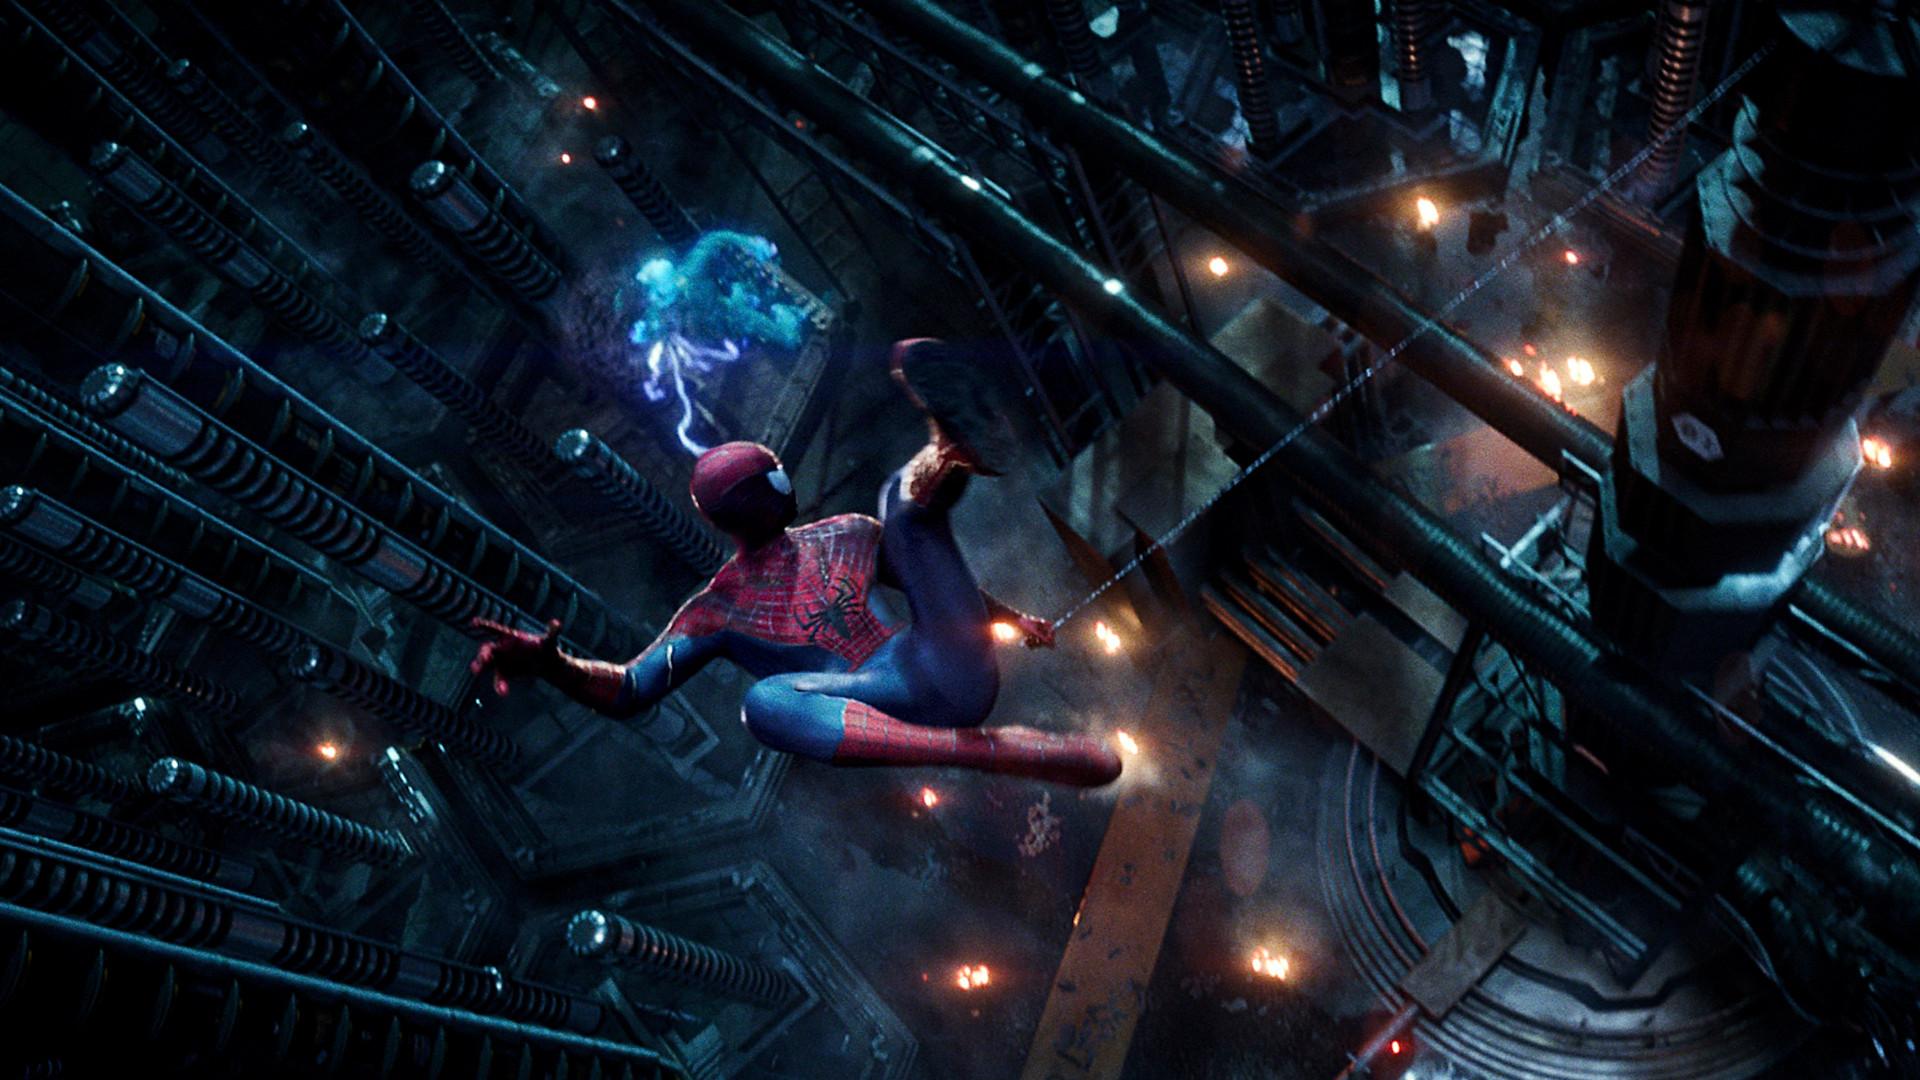 Spiderman 3 Wallpaper background picture